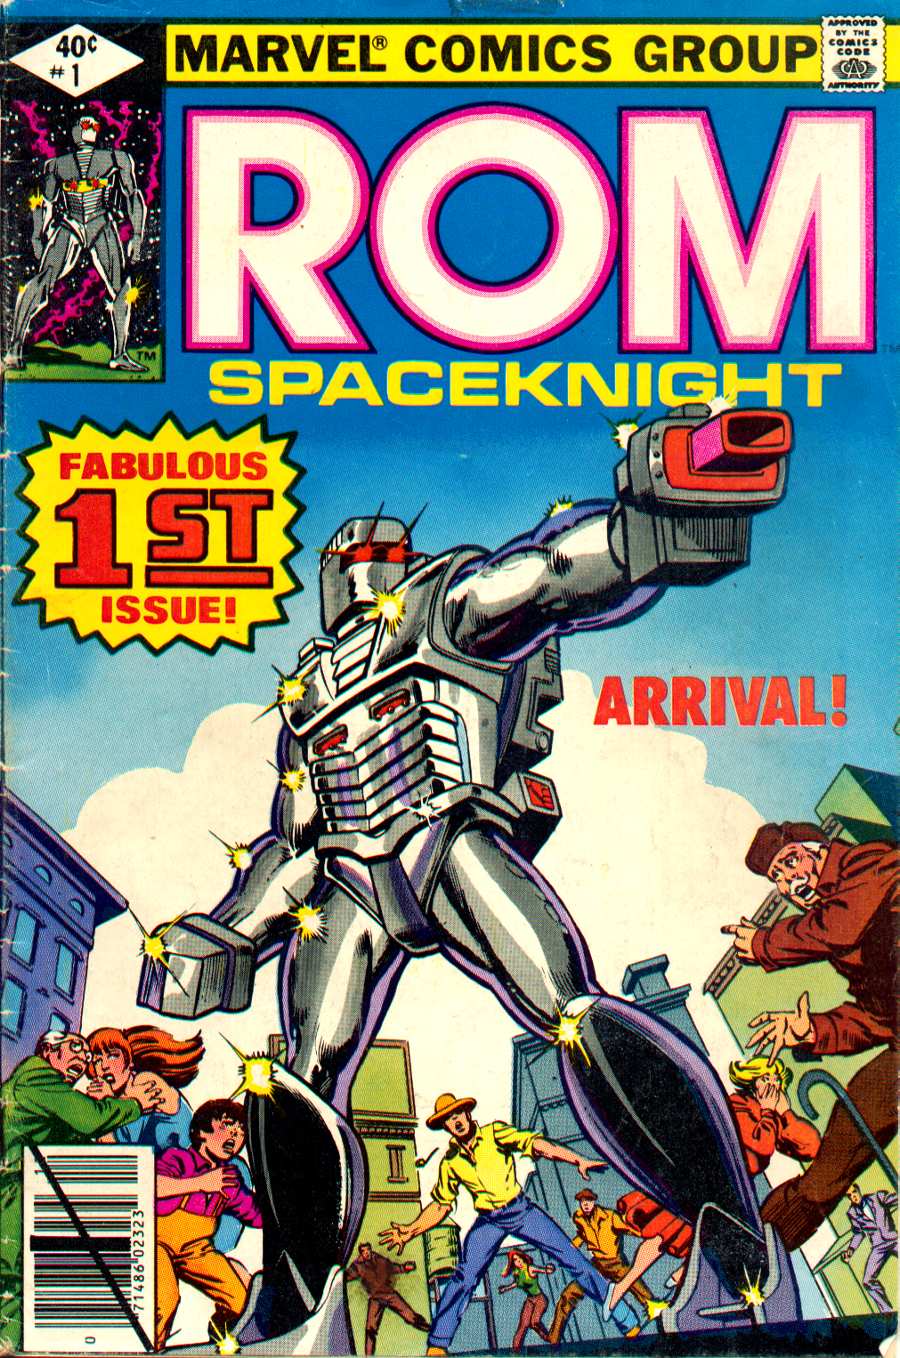 Rom Spaceknight #1 by Bill Mantlo and Sal Buscema